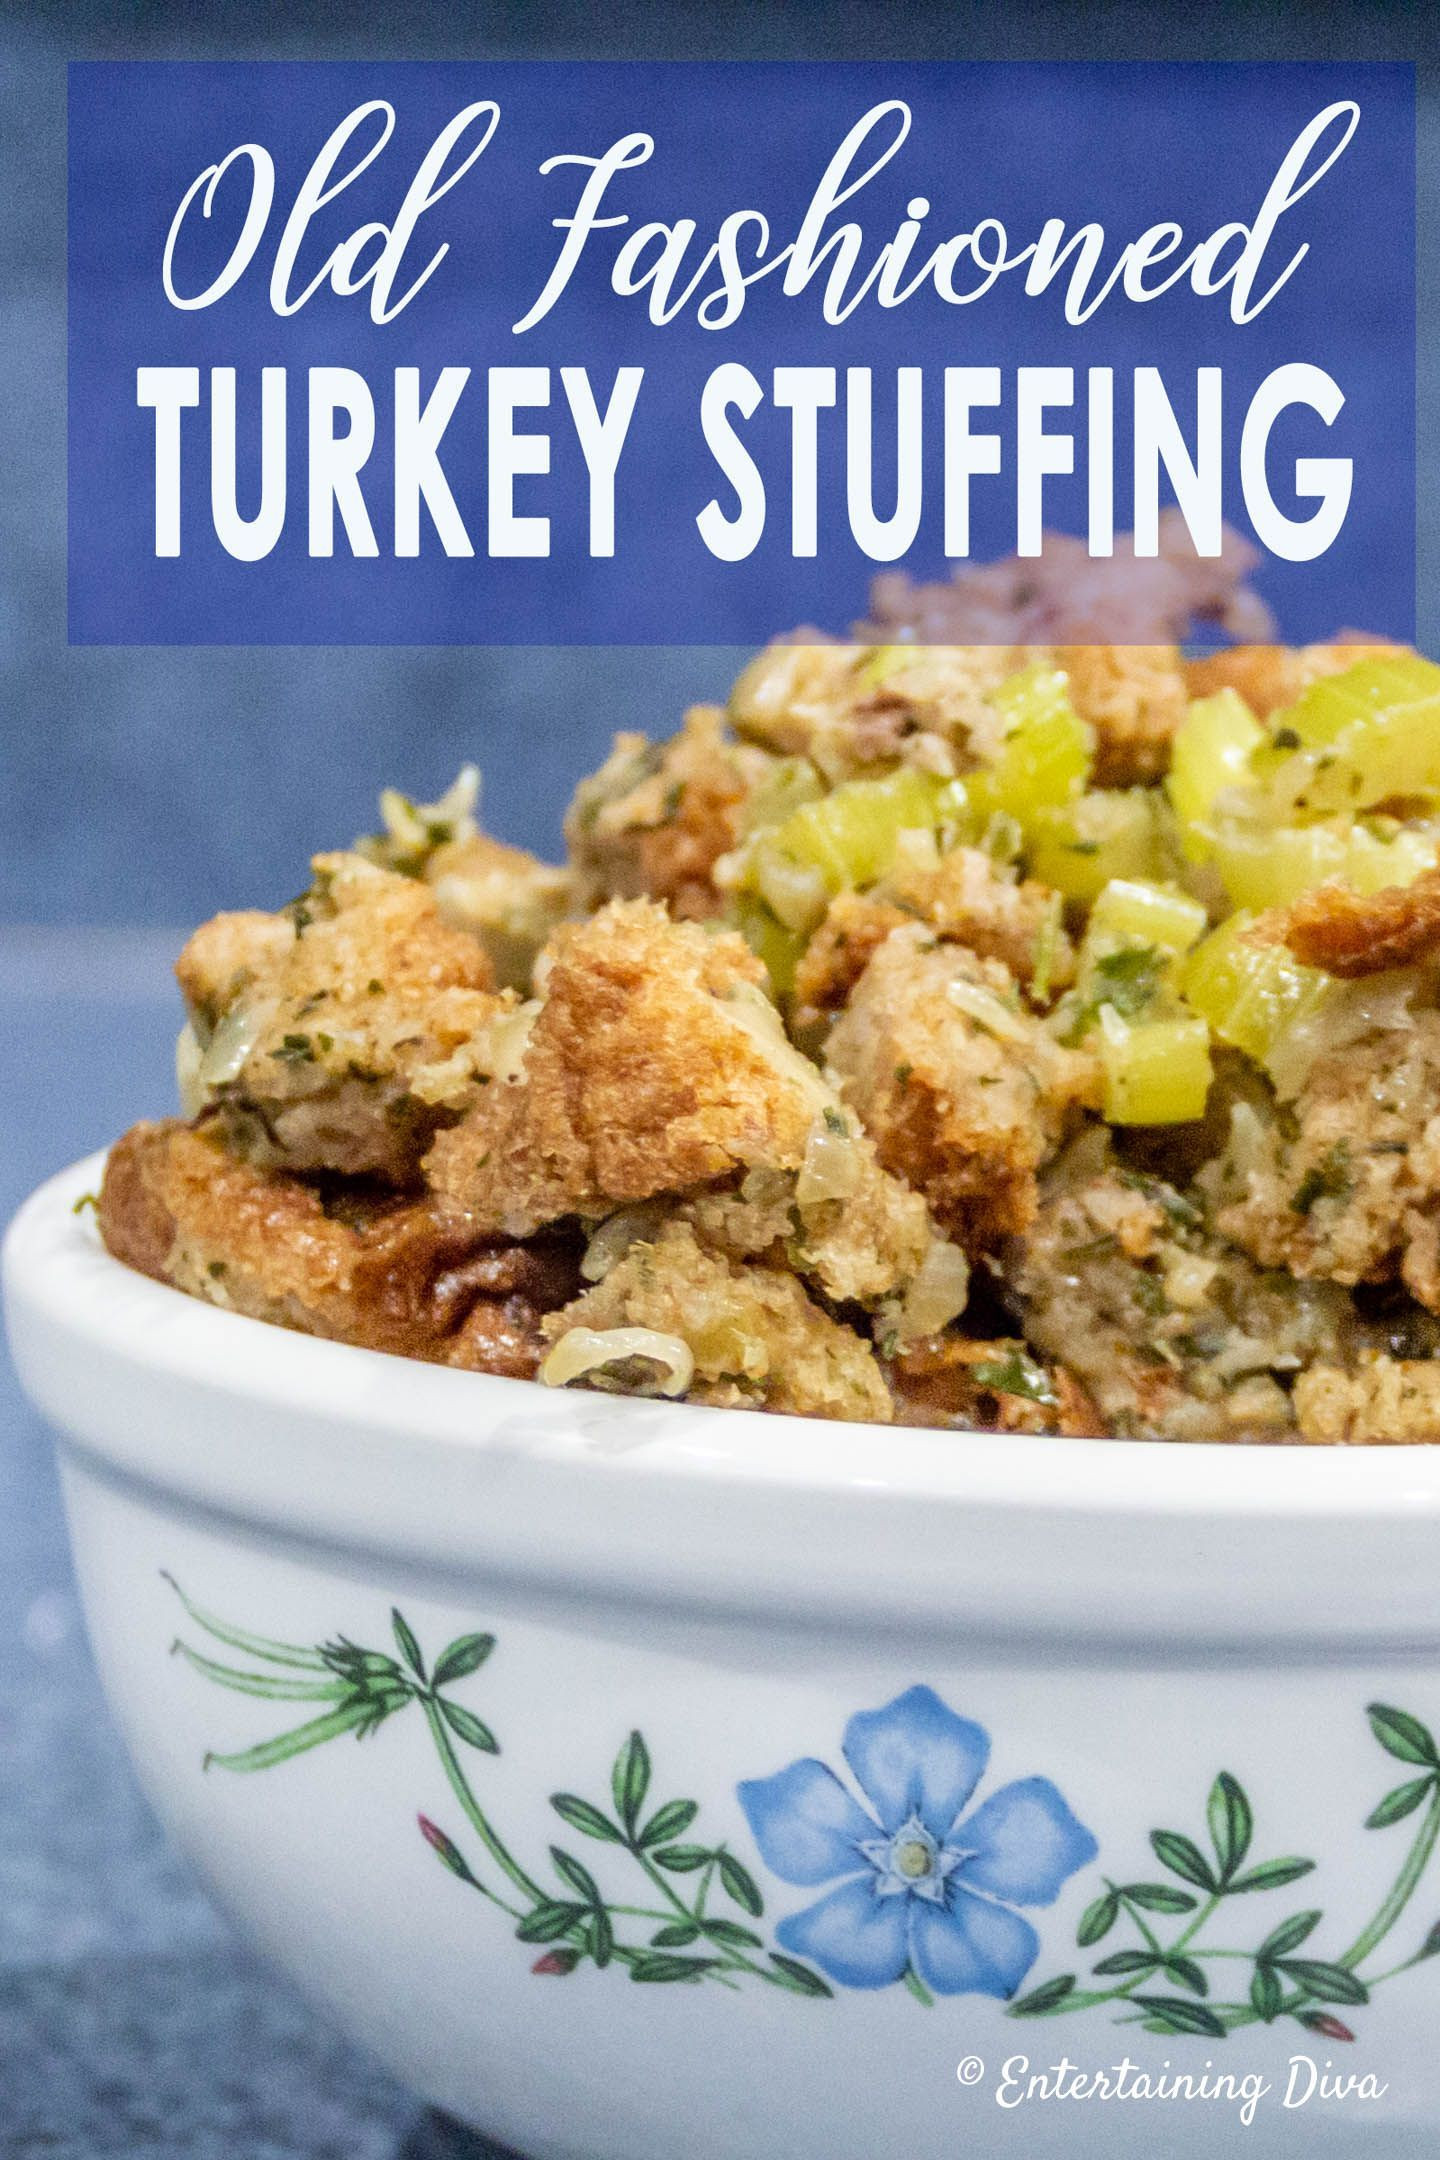 Traditional Thanksgiving Dressing Recipe
 This traditional turkey stuffing recipe made with bread